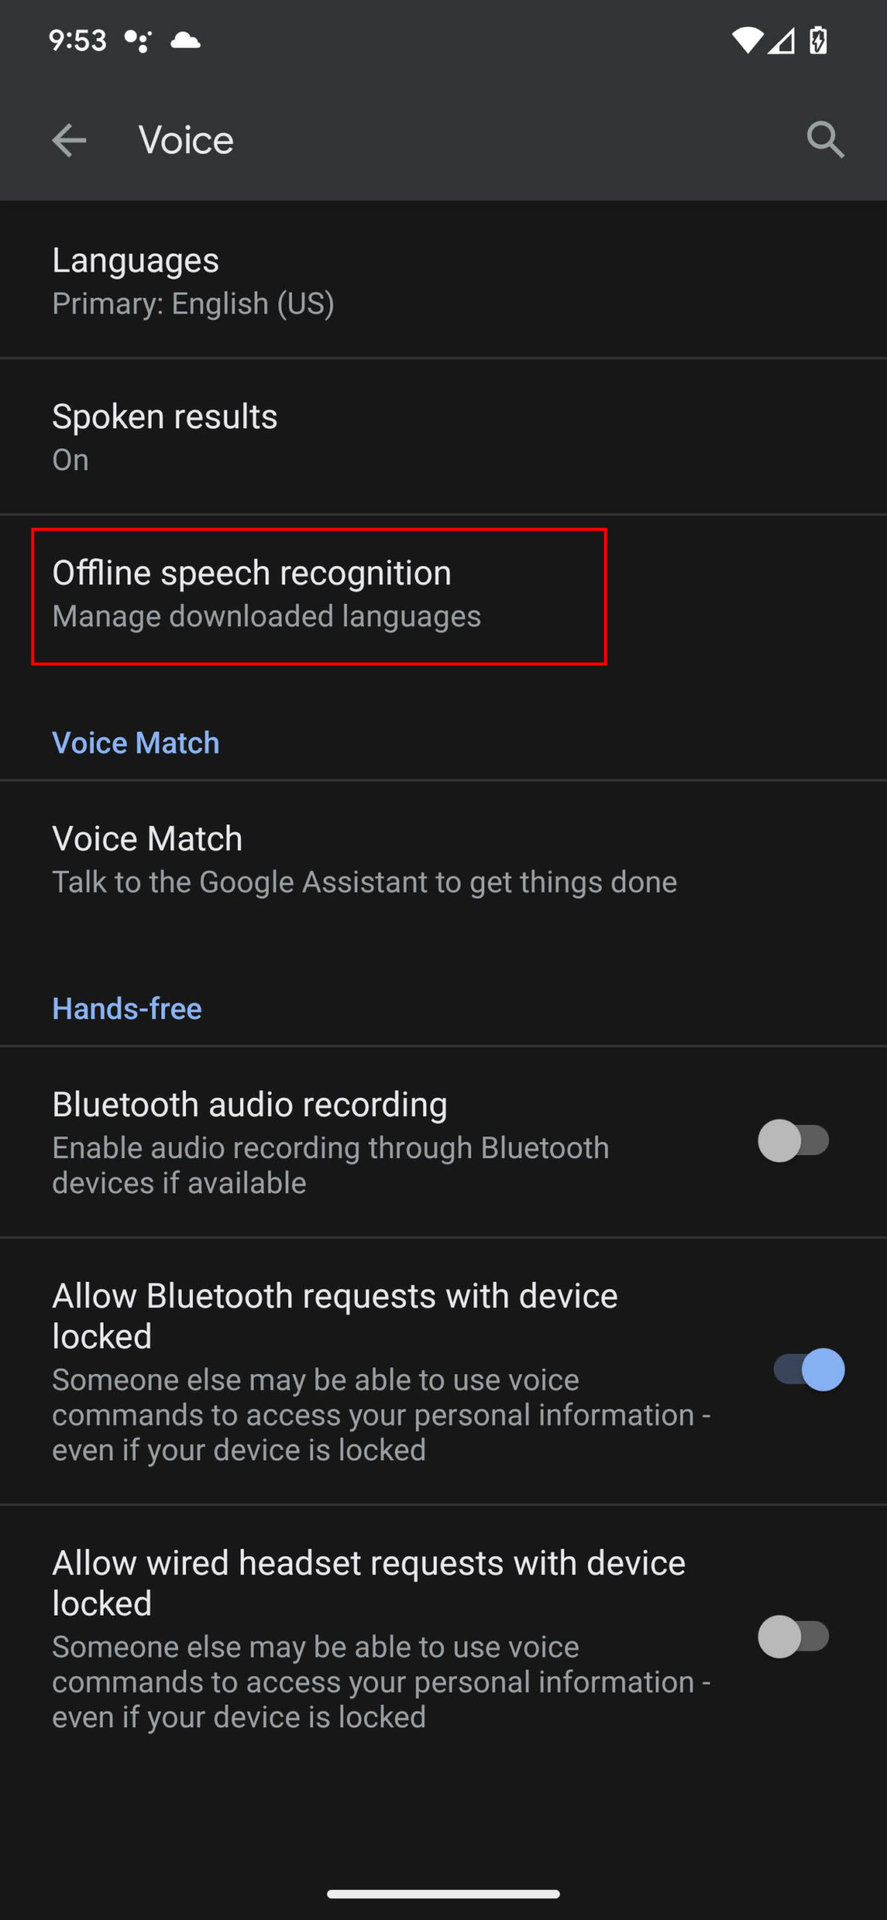 Download voice to text languages on Android 4